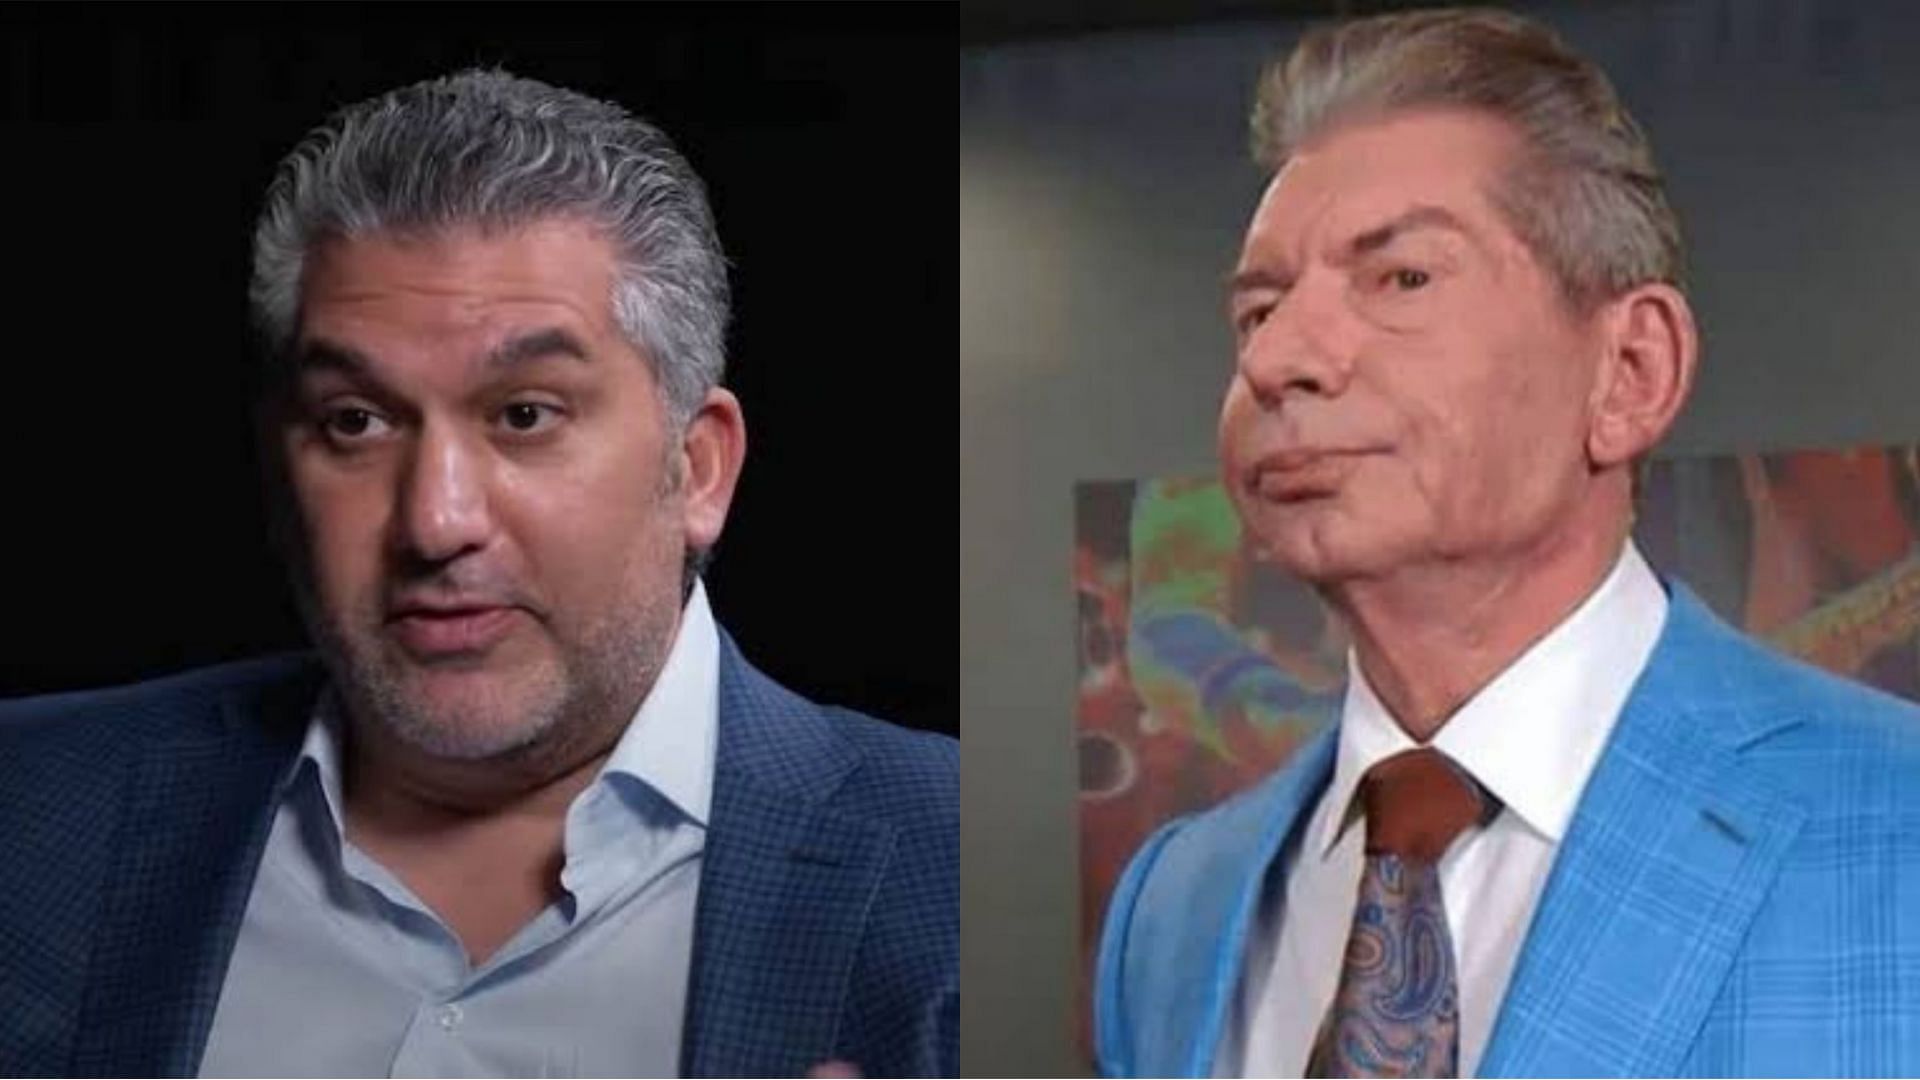 Nick Khan (left) and Vince McMahon (right)